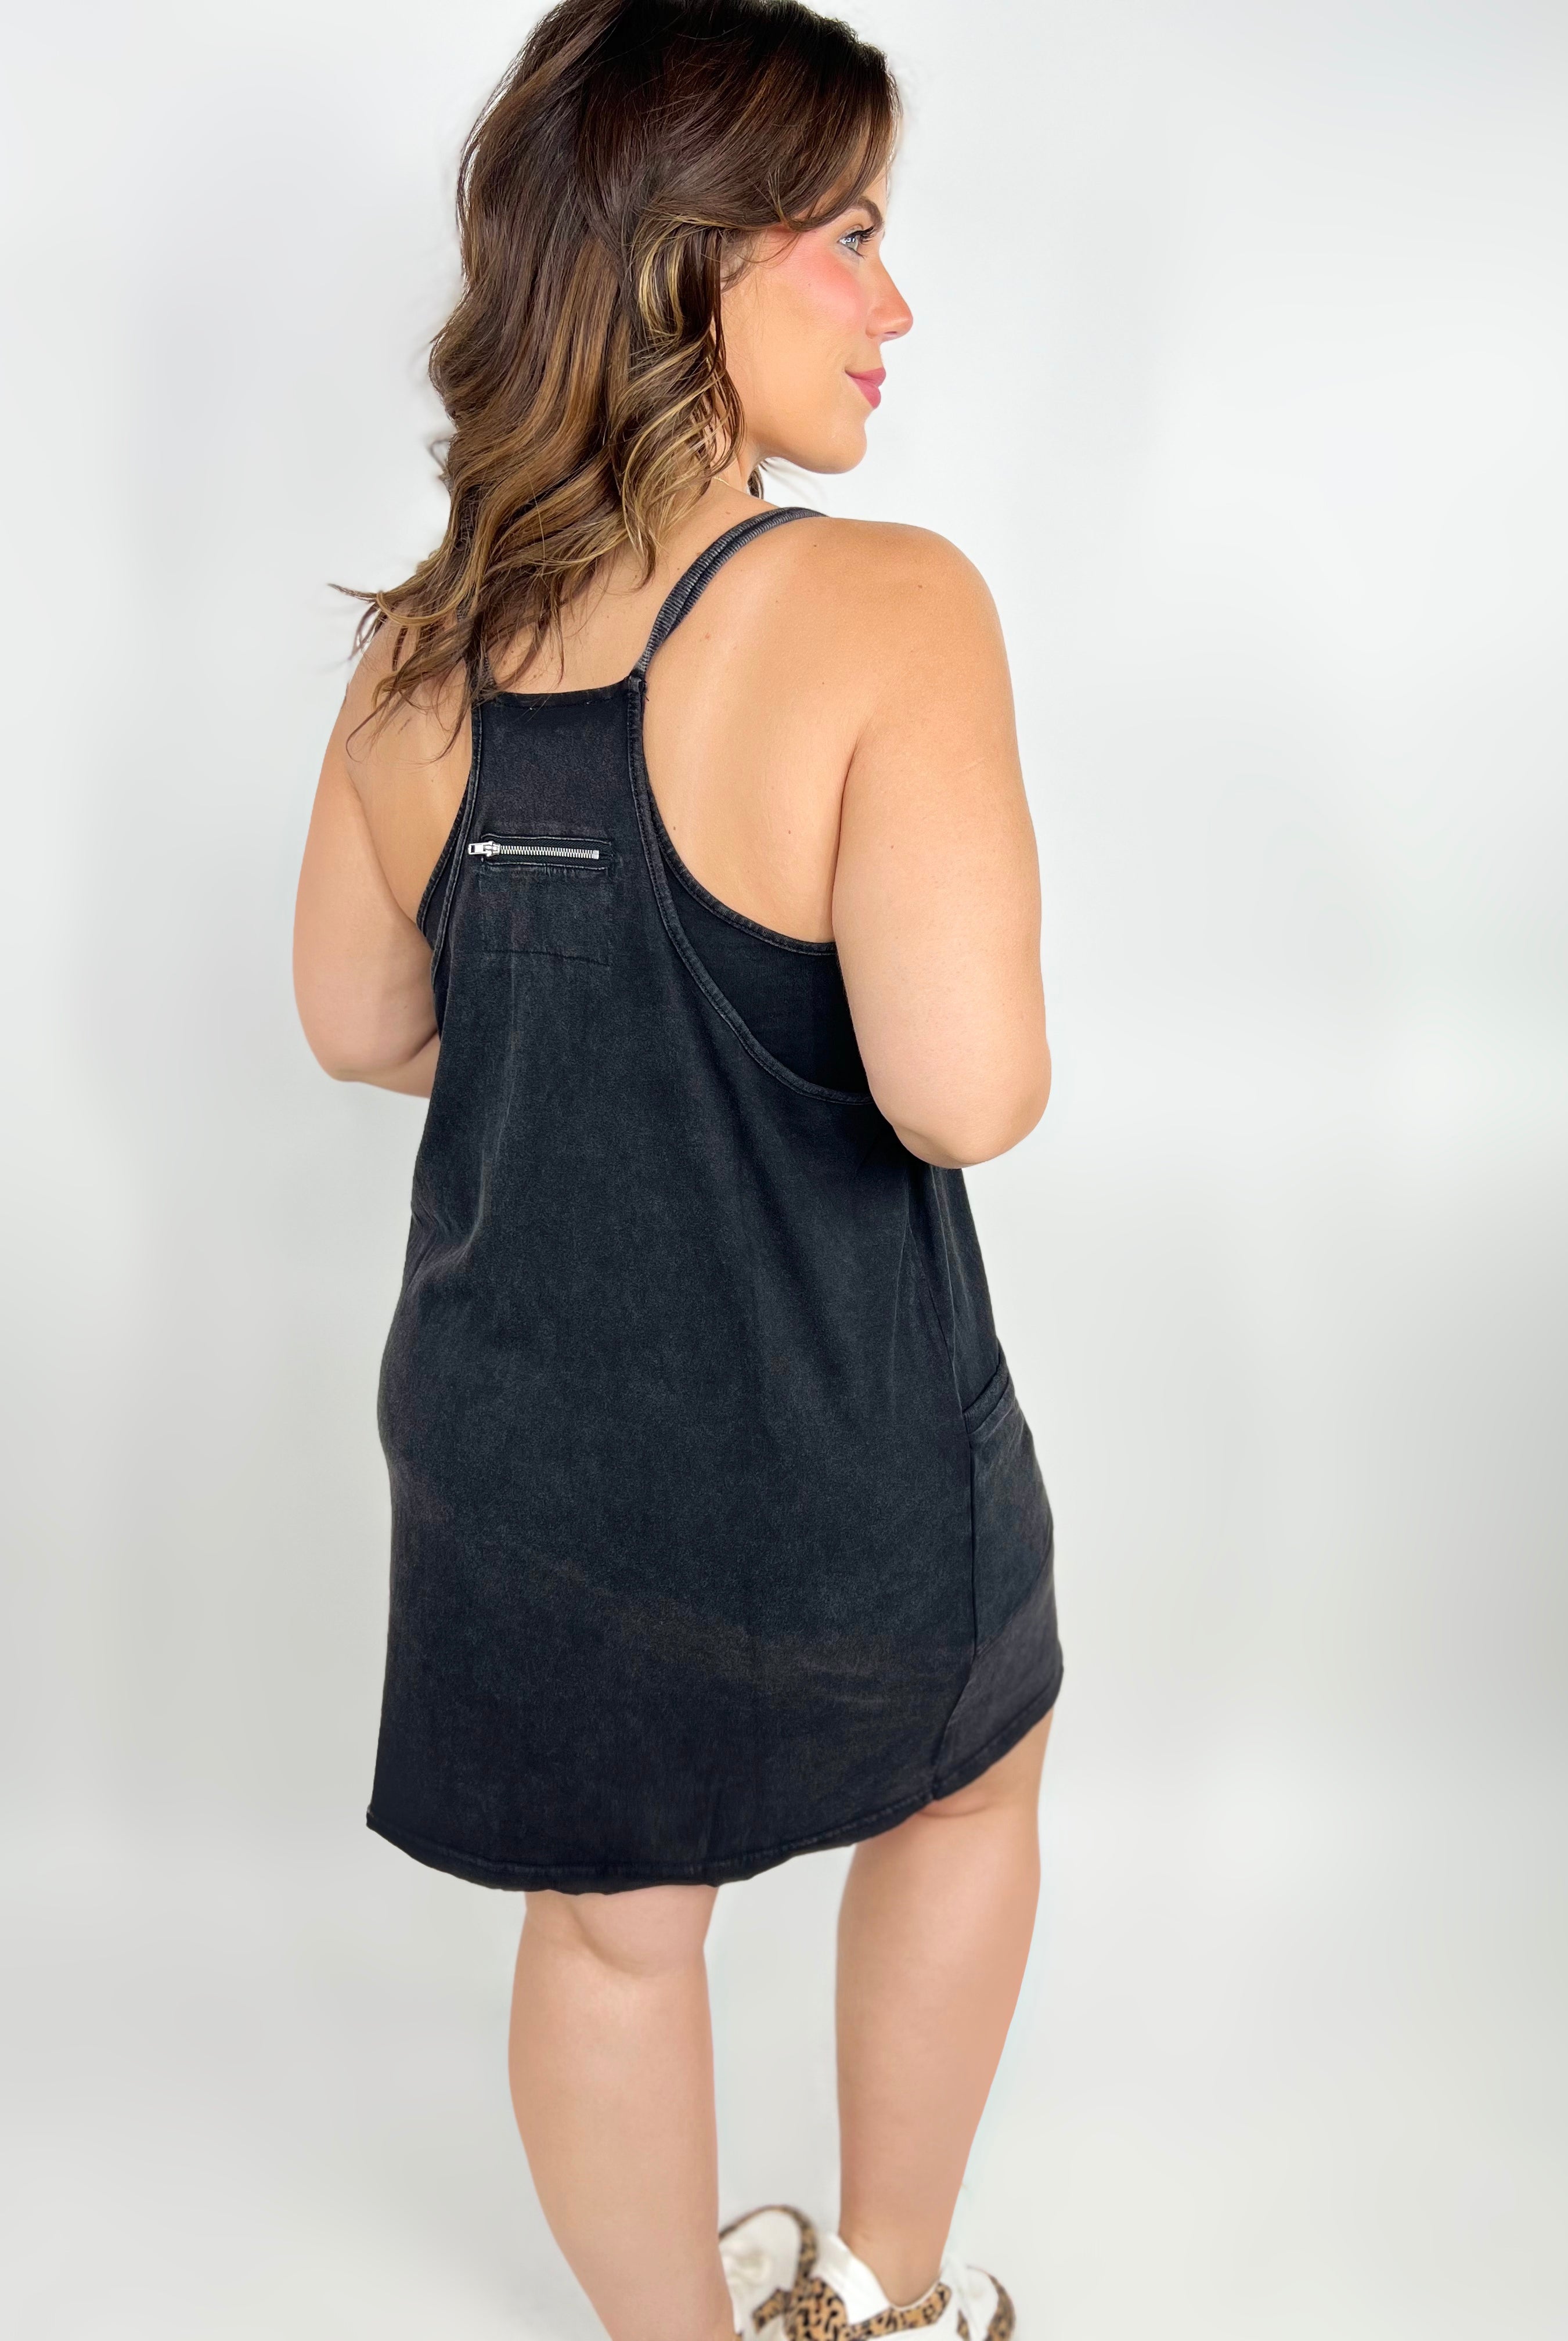 Too Rad Dress-230 Dresses/Jumpsuits/Rompers-Oddi-Heathered Boho Boutique, Women's Fashion and Accessories in Palmetto, FL